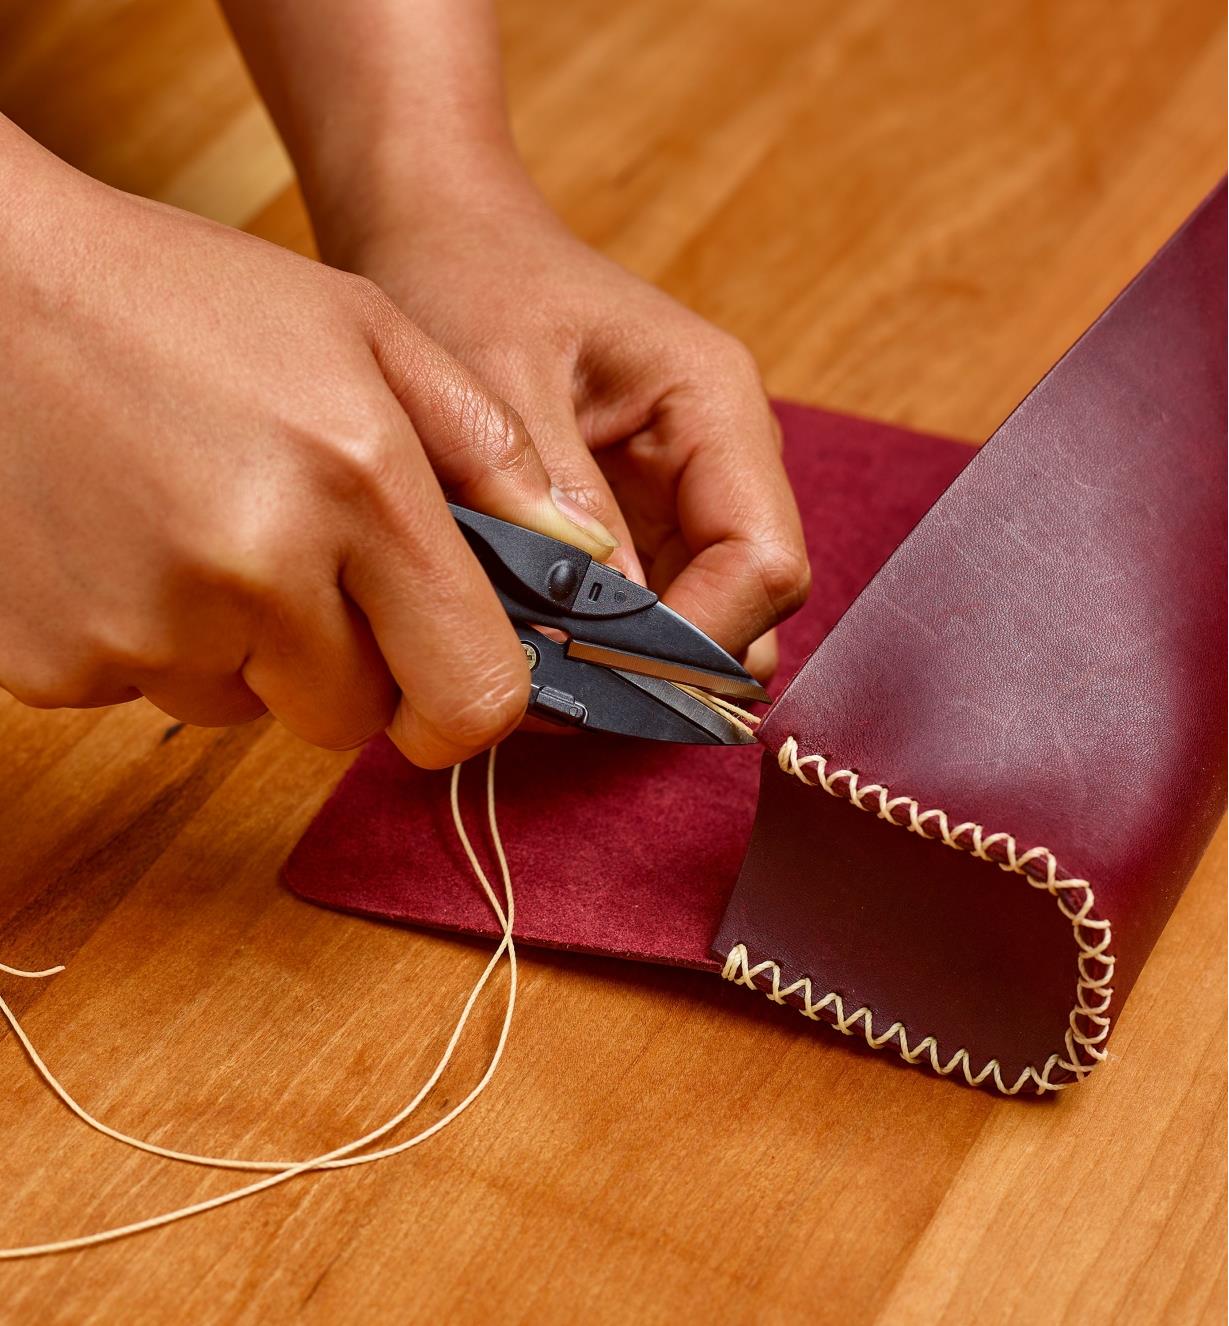 Using micro shears to trim a waxed linen thread on a leatherworking project